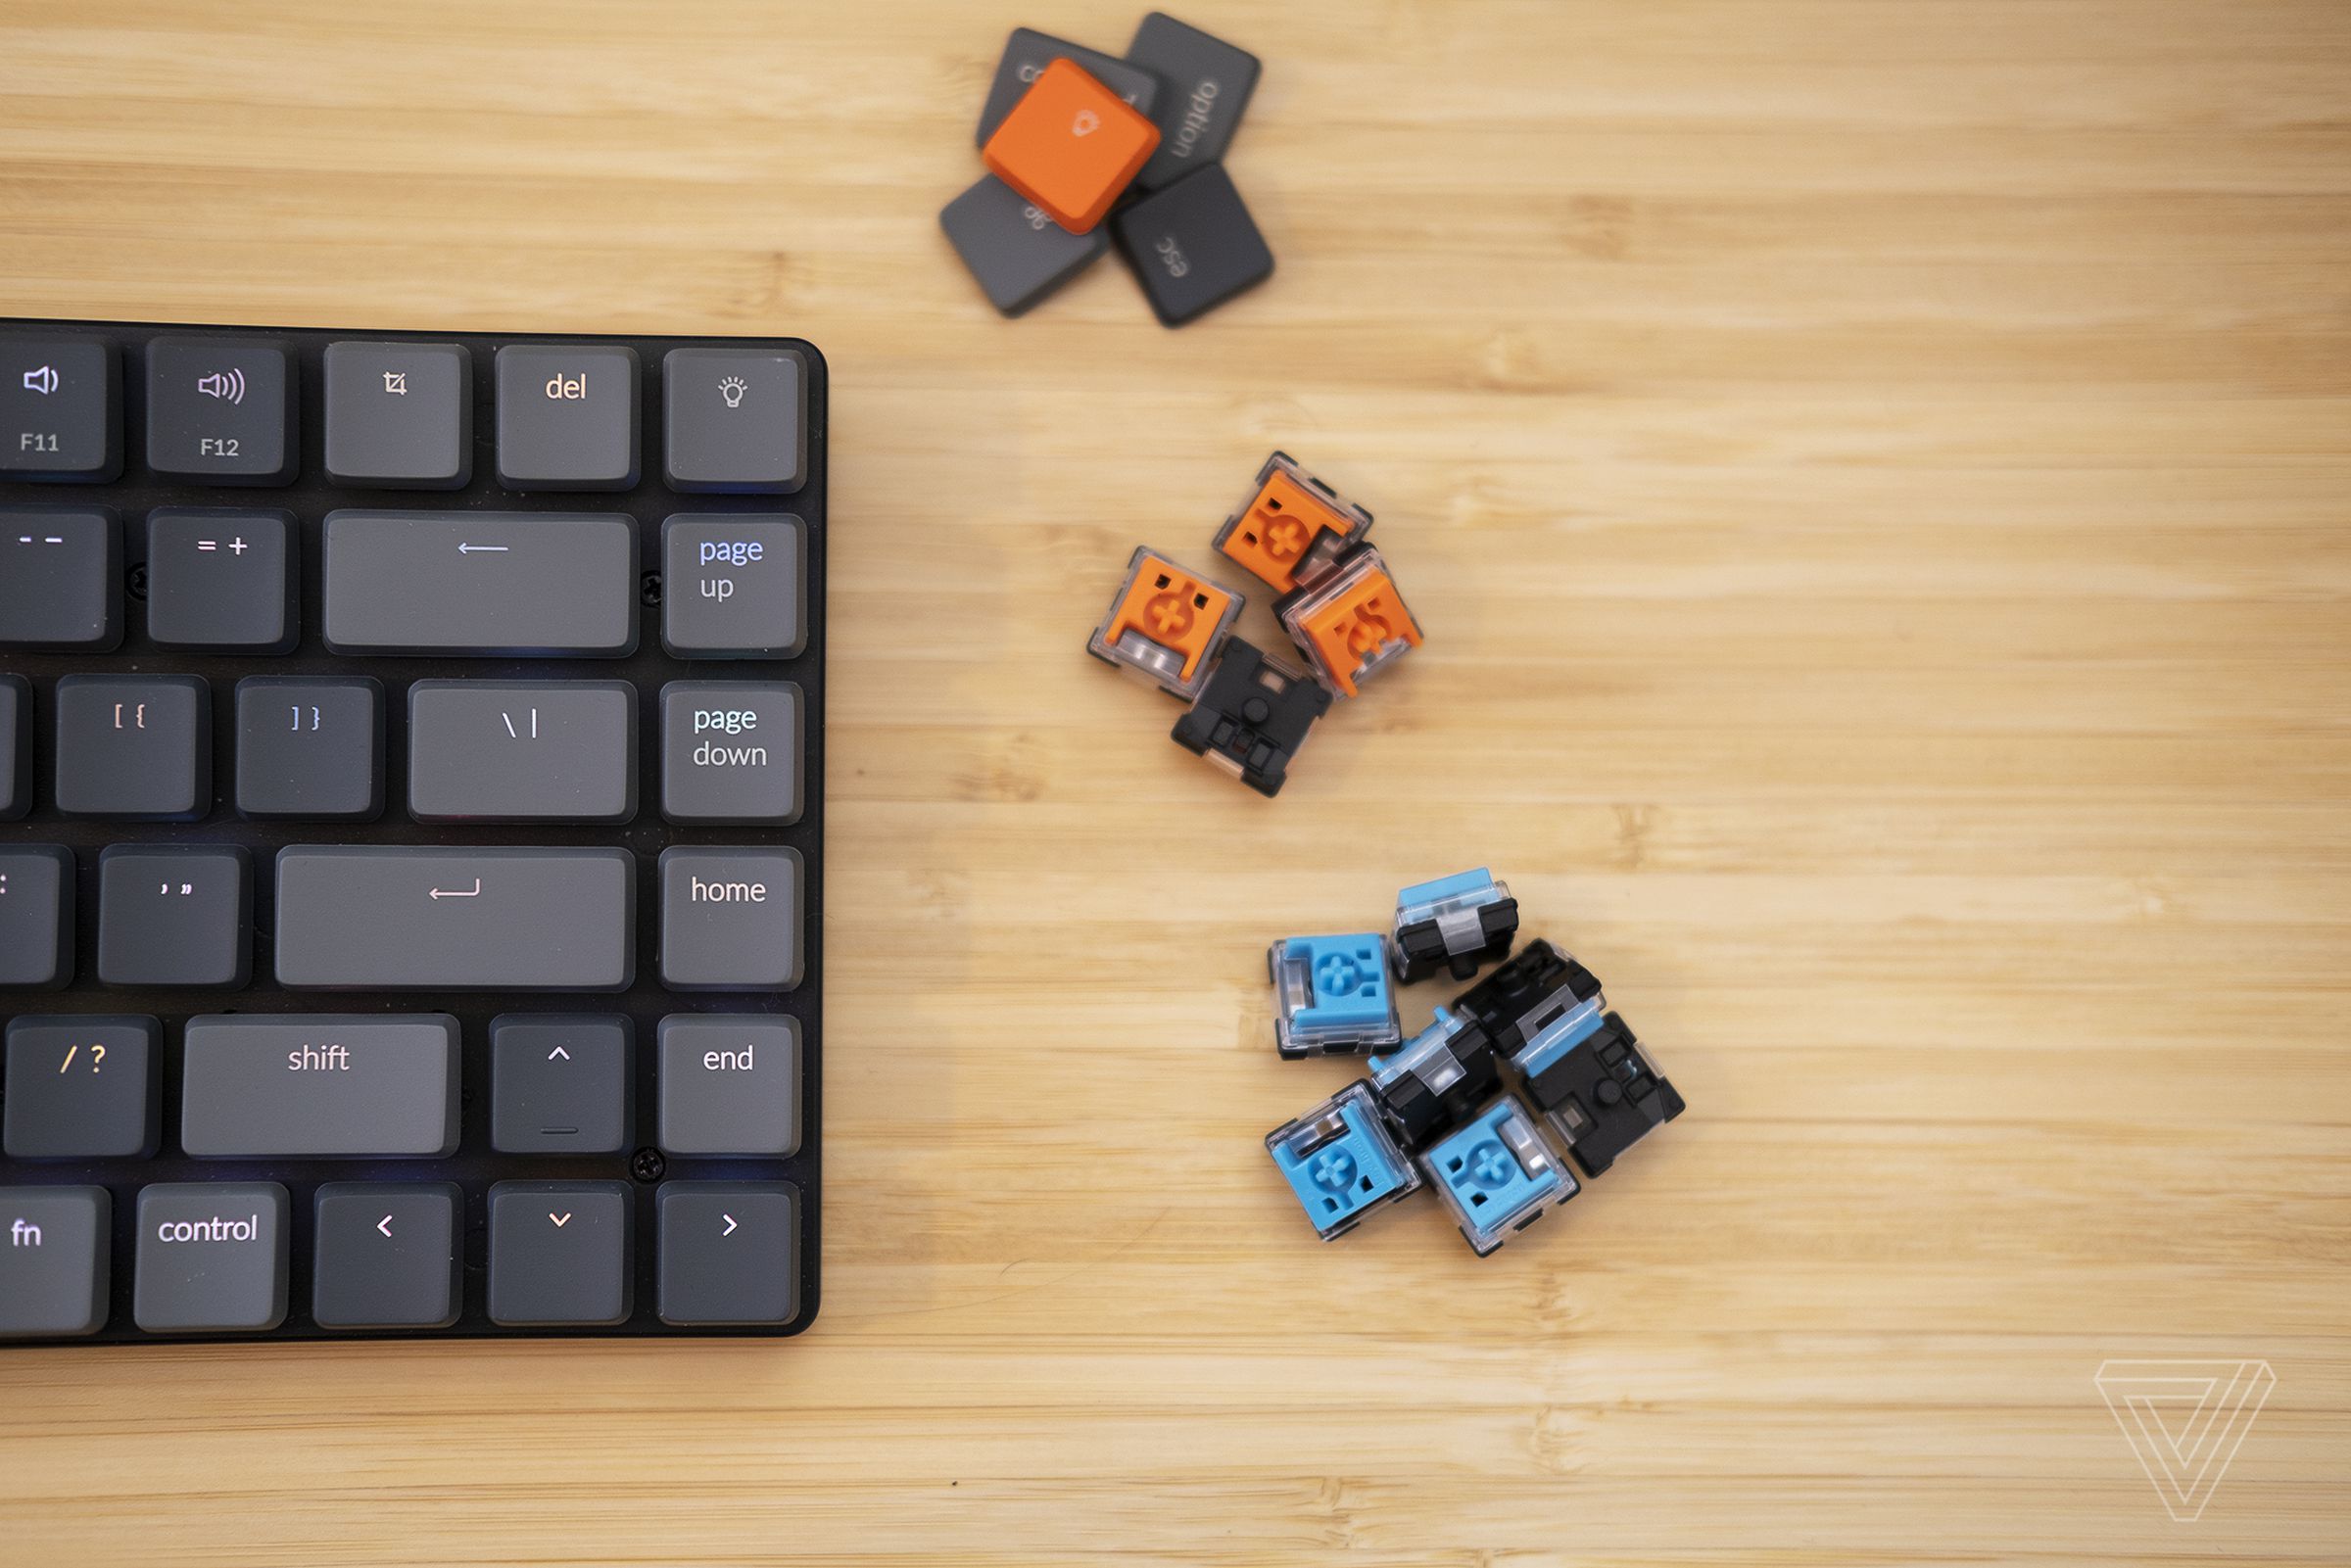 The compact layout finds room for the most commonly used keys.